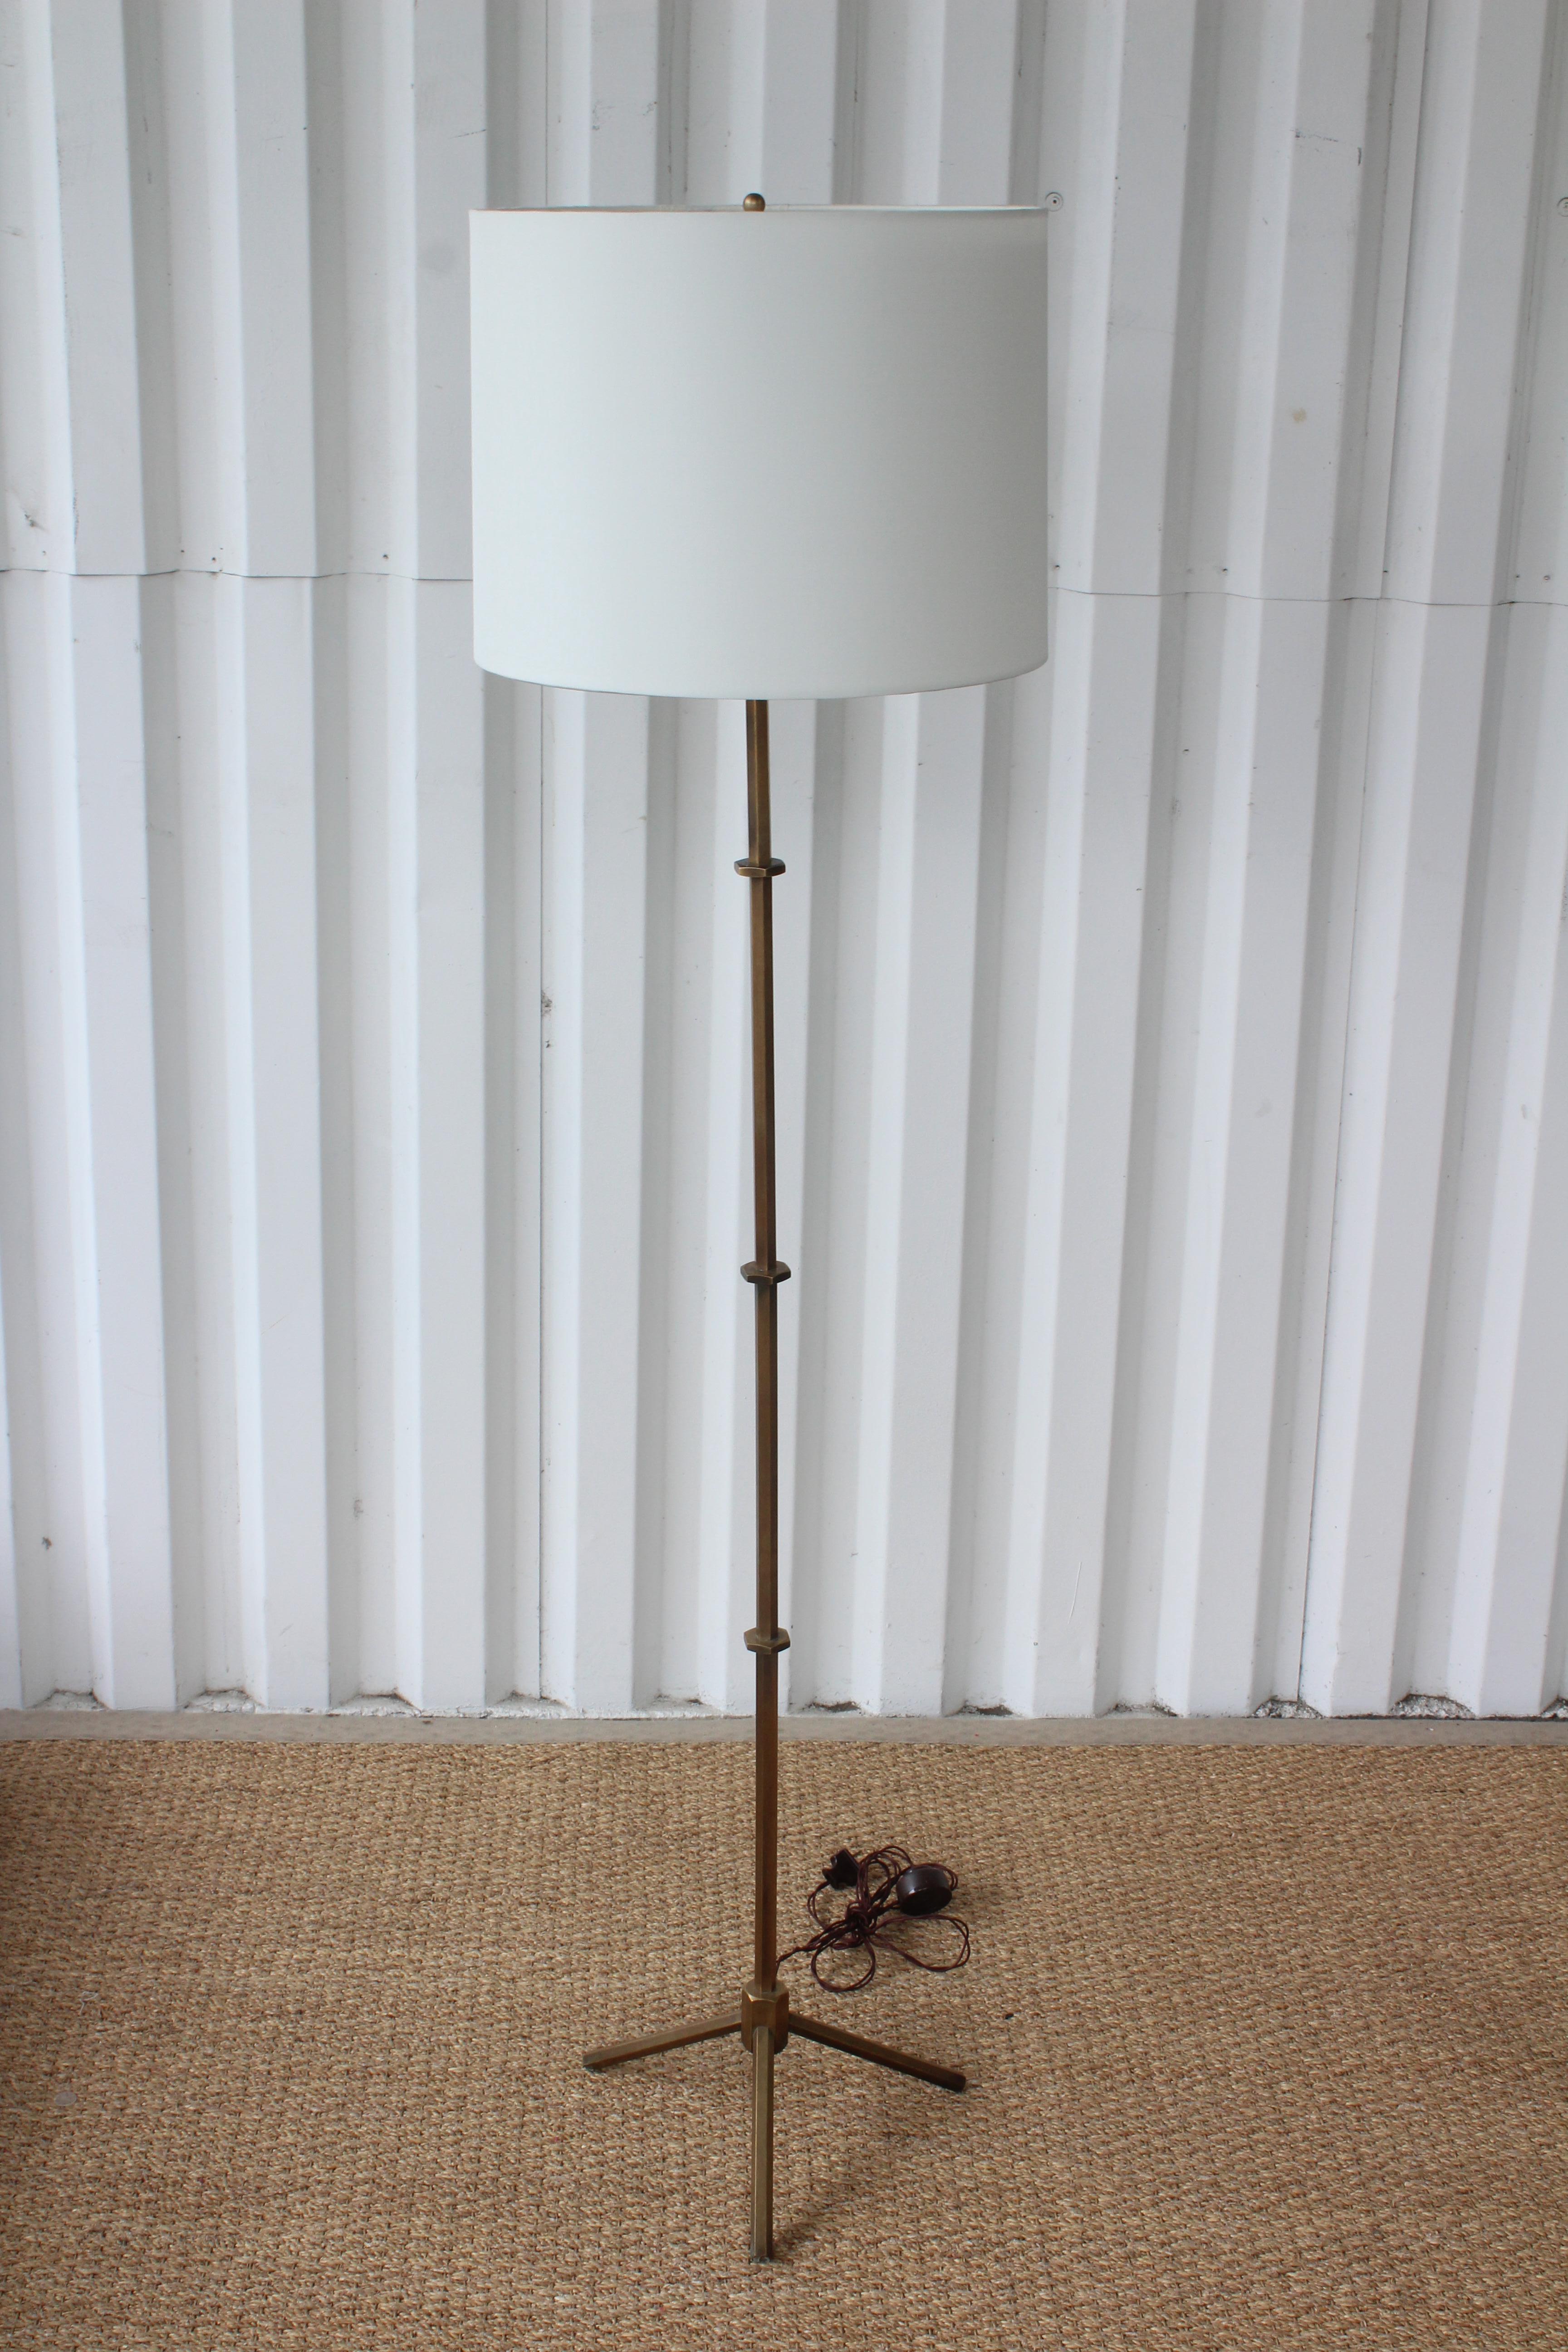 Vintage solid brass floor lamp by Maison Baguès, France, 1950s. Newly rewired and fitted with a custom made silk shade. In excellent condition. 62